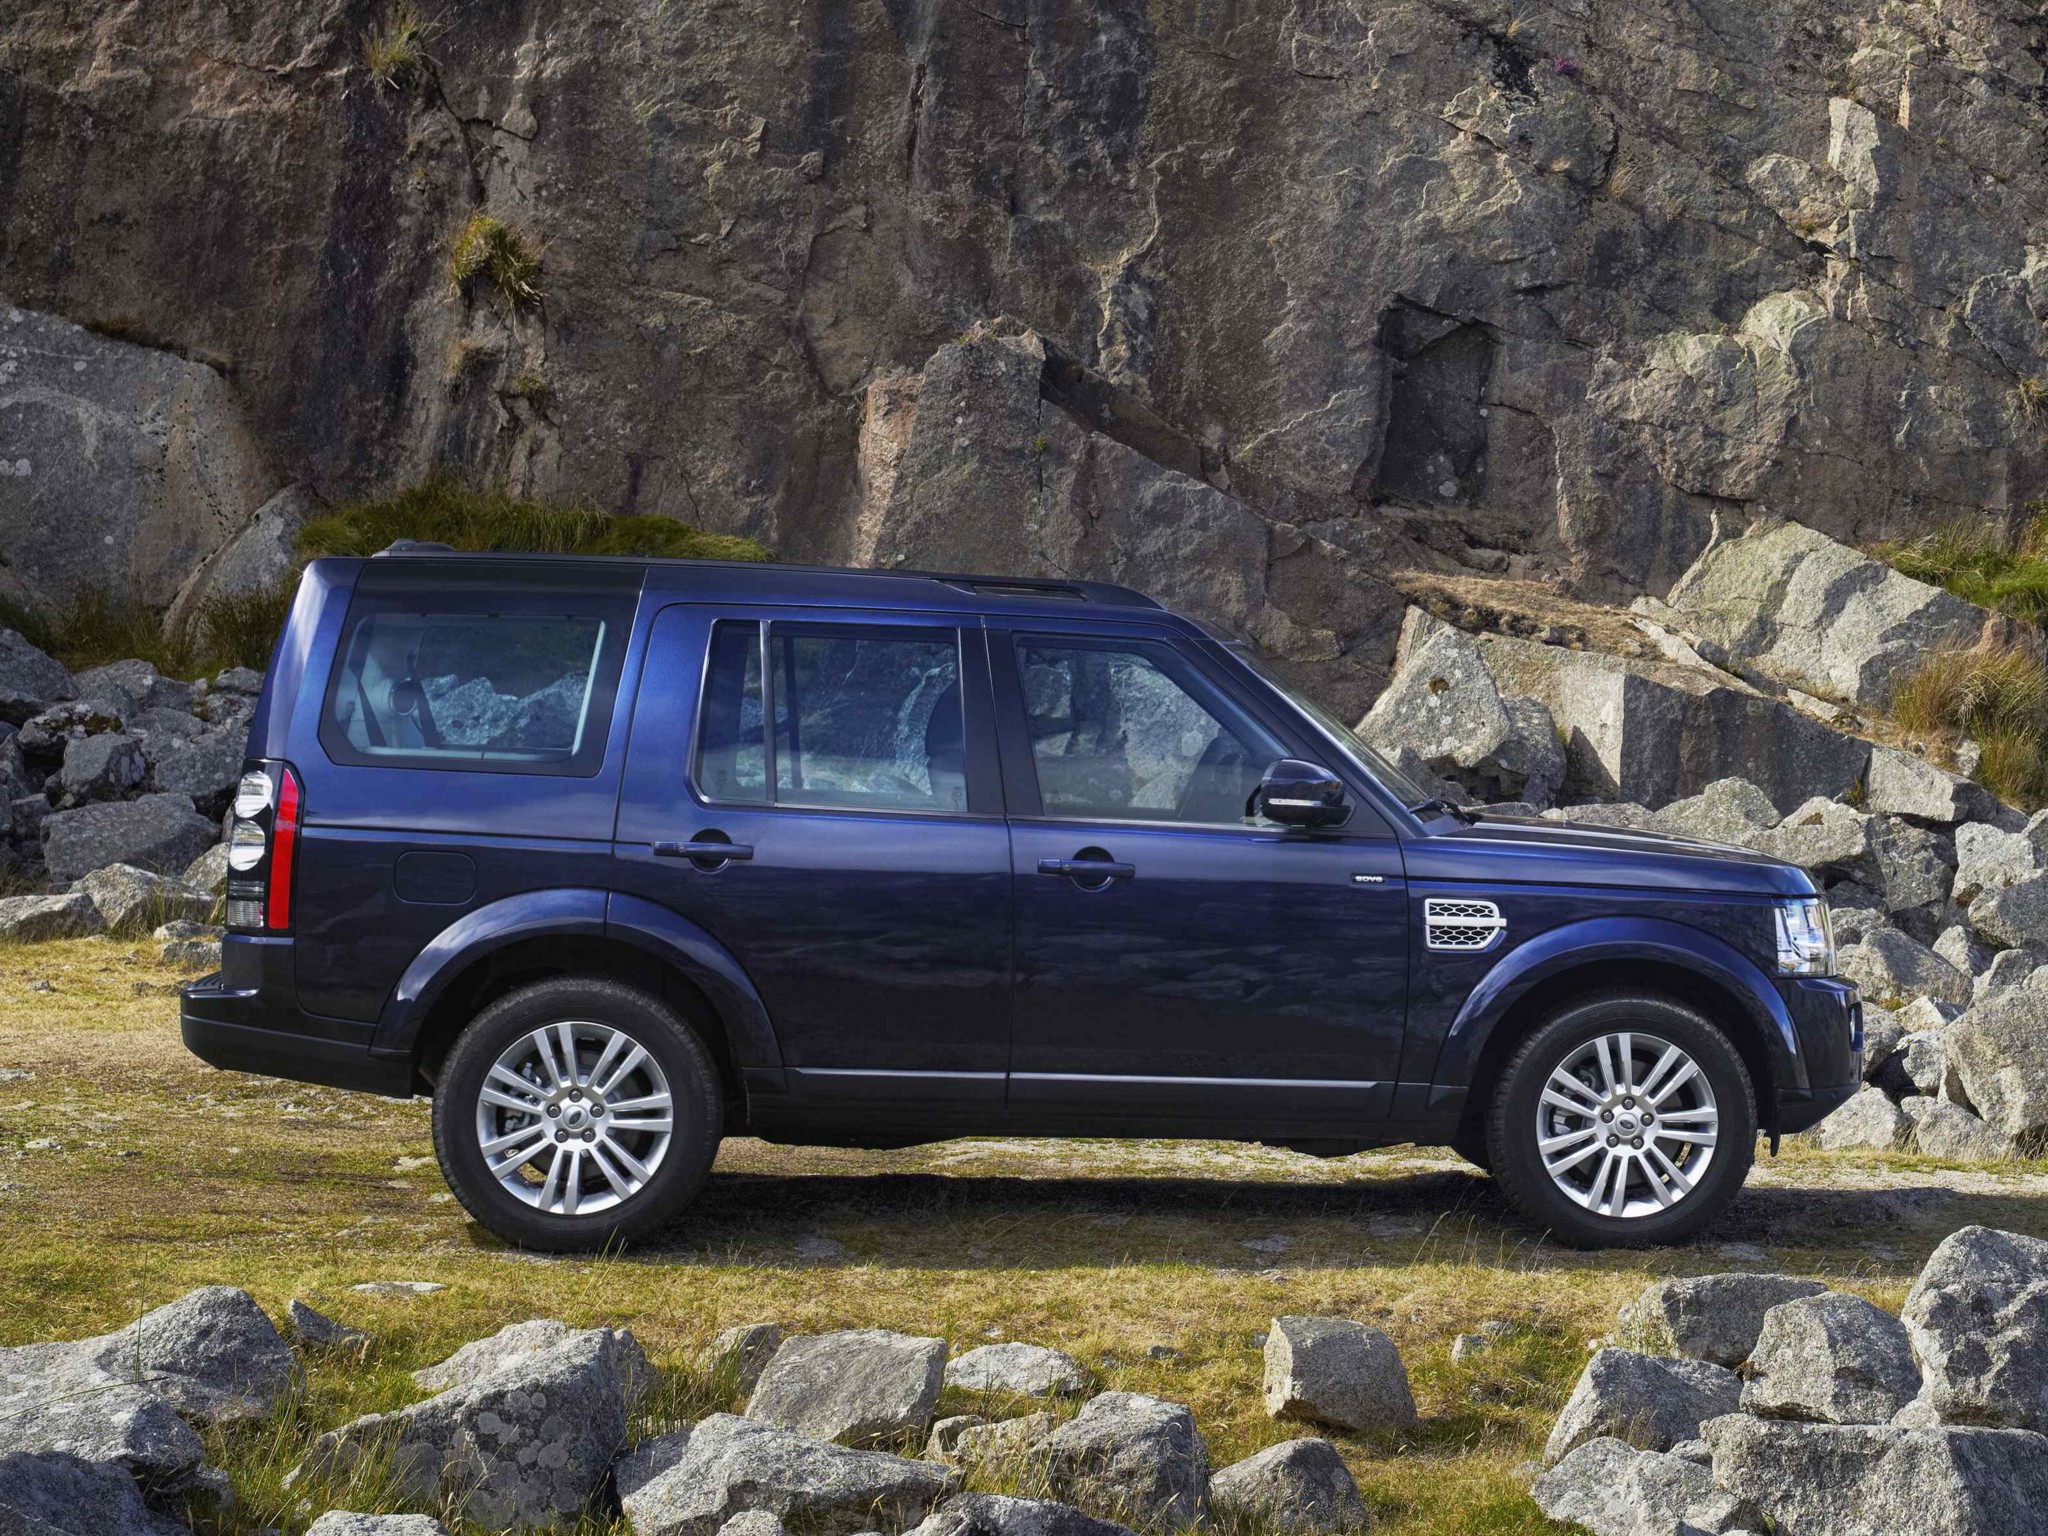 IAB Report - 2015 Land Rover Discovery gets more optional 